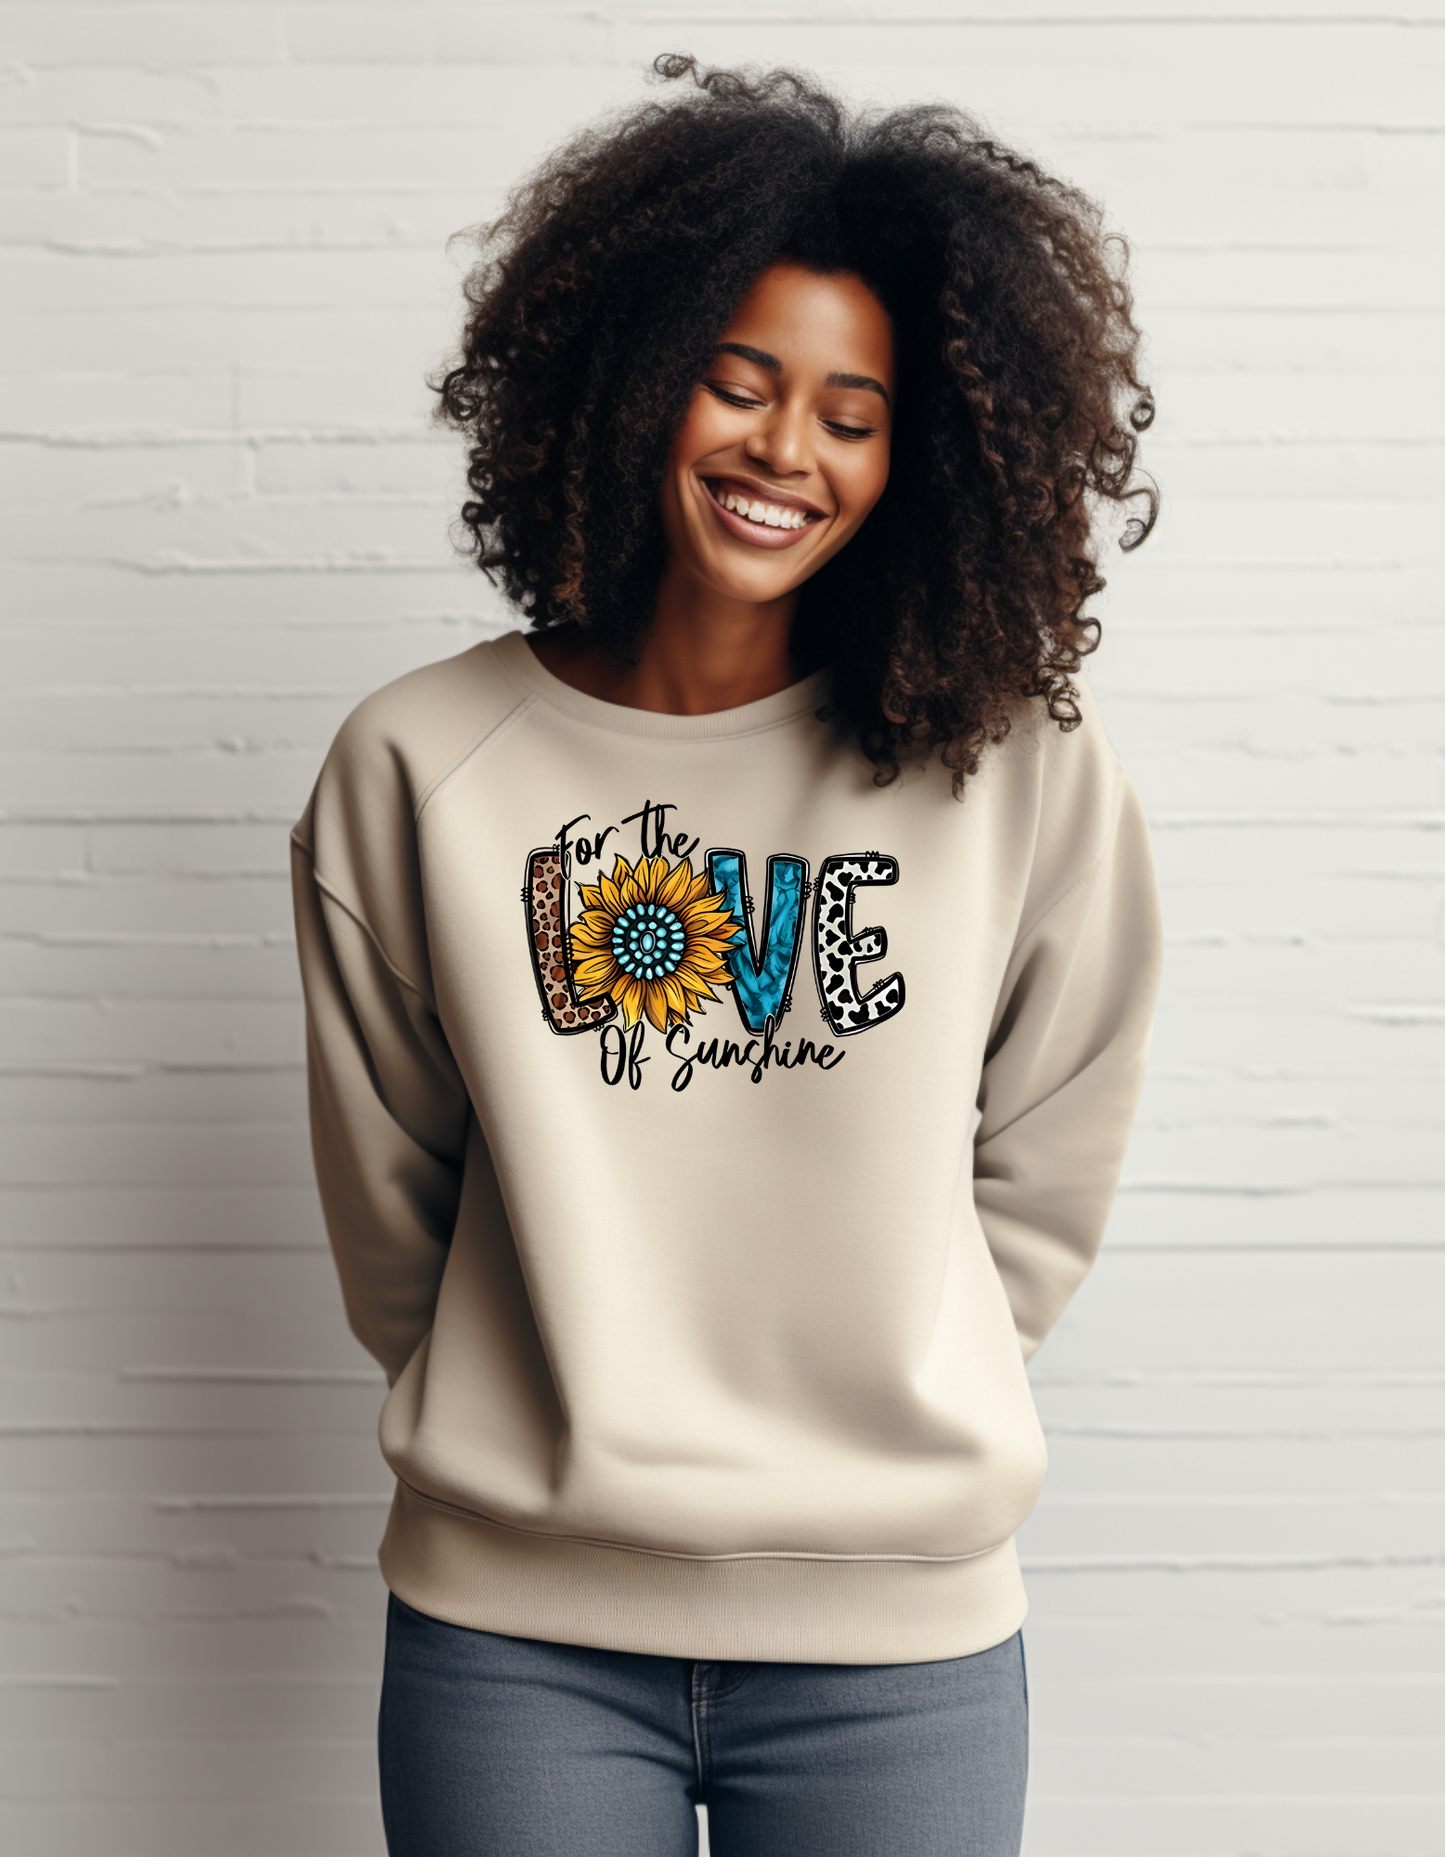 For The Love Of Sunshine Sweater